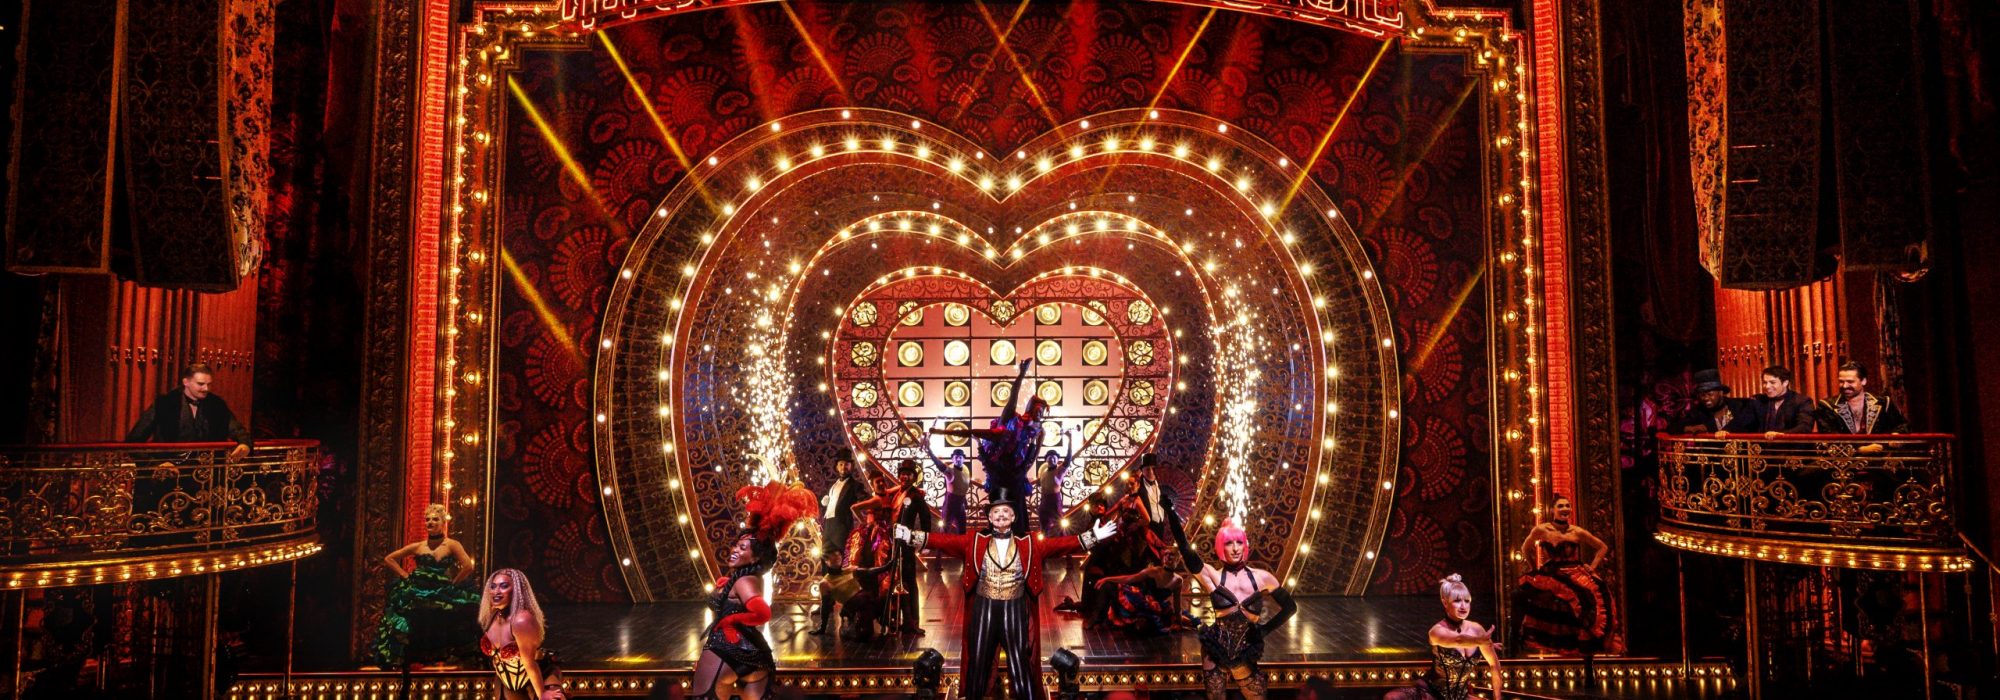 Cast-of-Moulin-Rouge-The-Musical_CREDIT-MICHELLE-GRACE-HUNDER-scaled